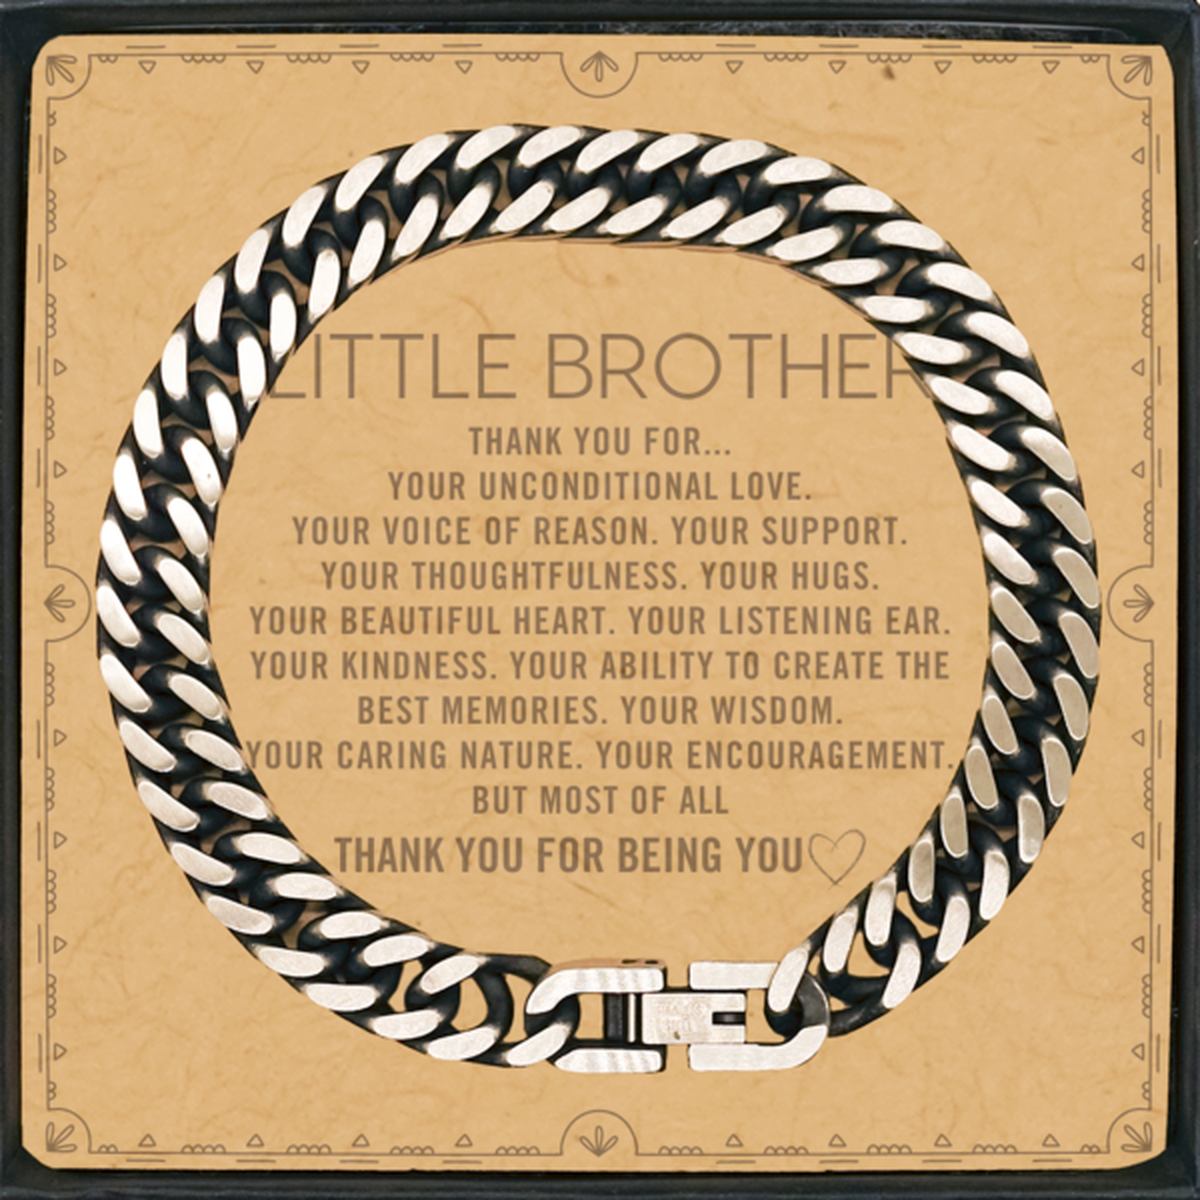 Little Brother Cuban Link Chain Bracelet Custom, Message Card Gifts For Little Brother Christmas Graduation Birthday Gifts for Men Women Little Brother Thank you for Your unconditional love